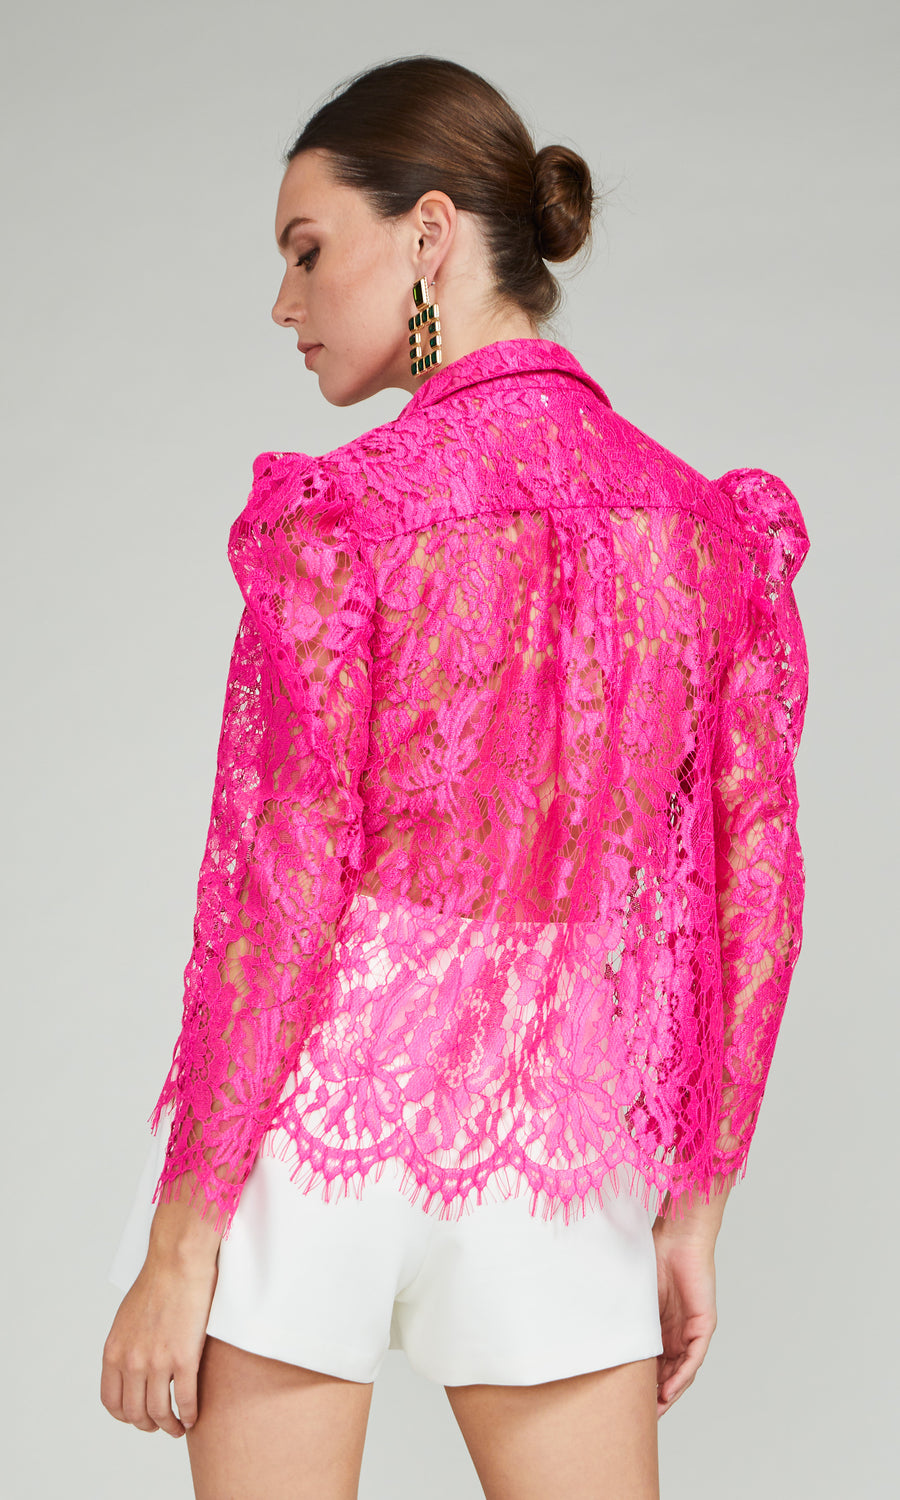 Valencia Lace Blouse - Hot Pink 